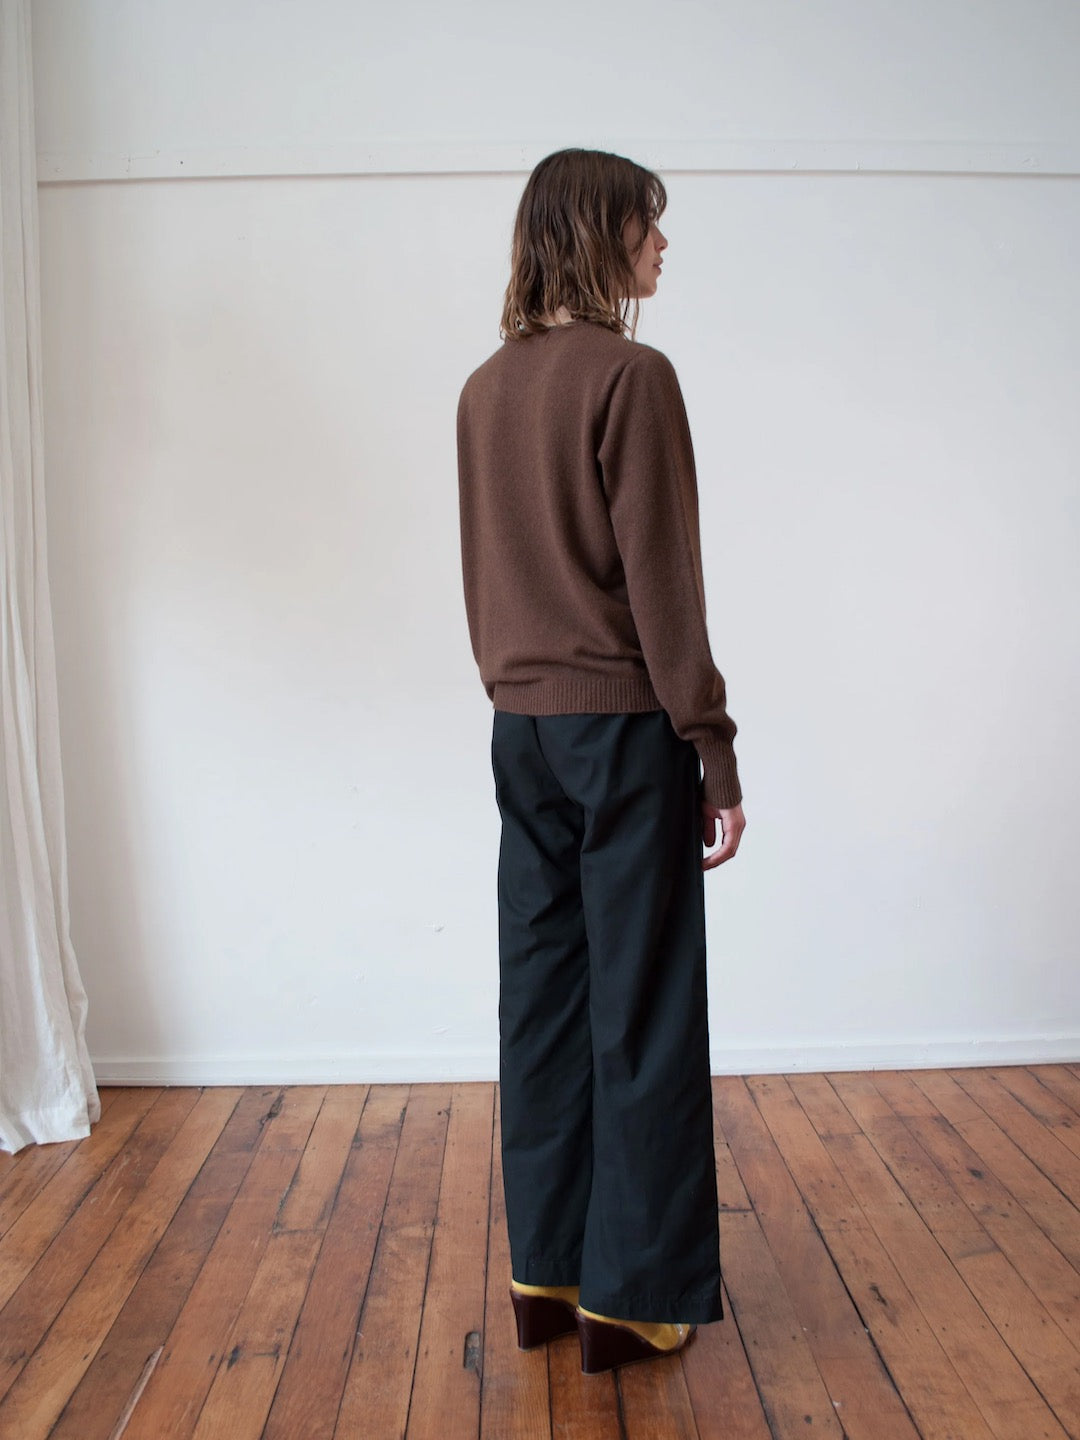 A woman is standing in a room wearing an OVNA OVICH Kom Jumper – Mud and wide leg pants.